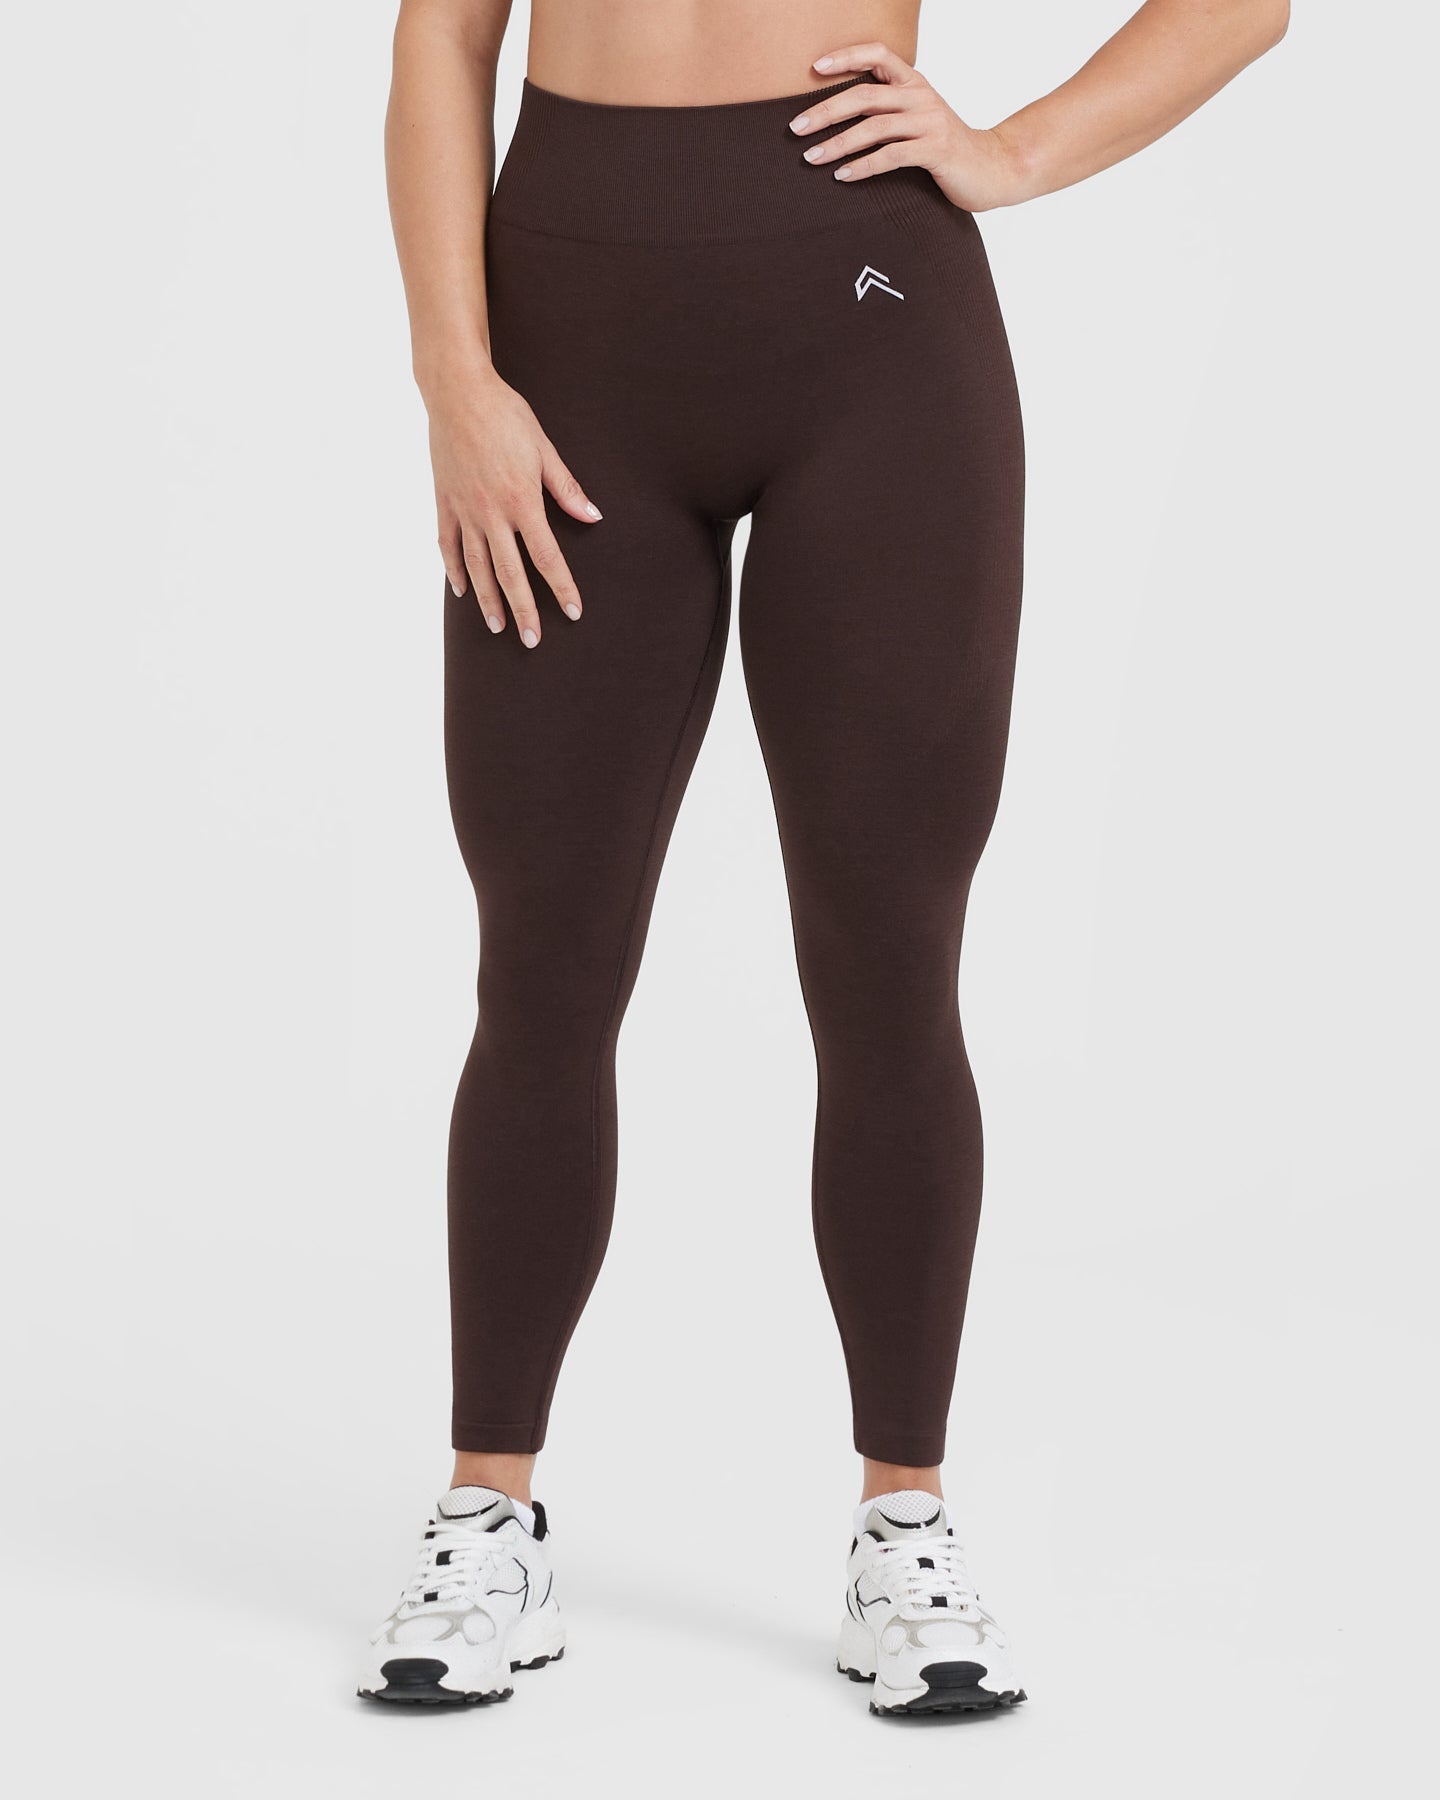 Leggings | US Active Classic Seamless Oner Marl Cocoa 2.0 70%